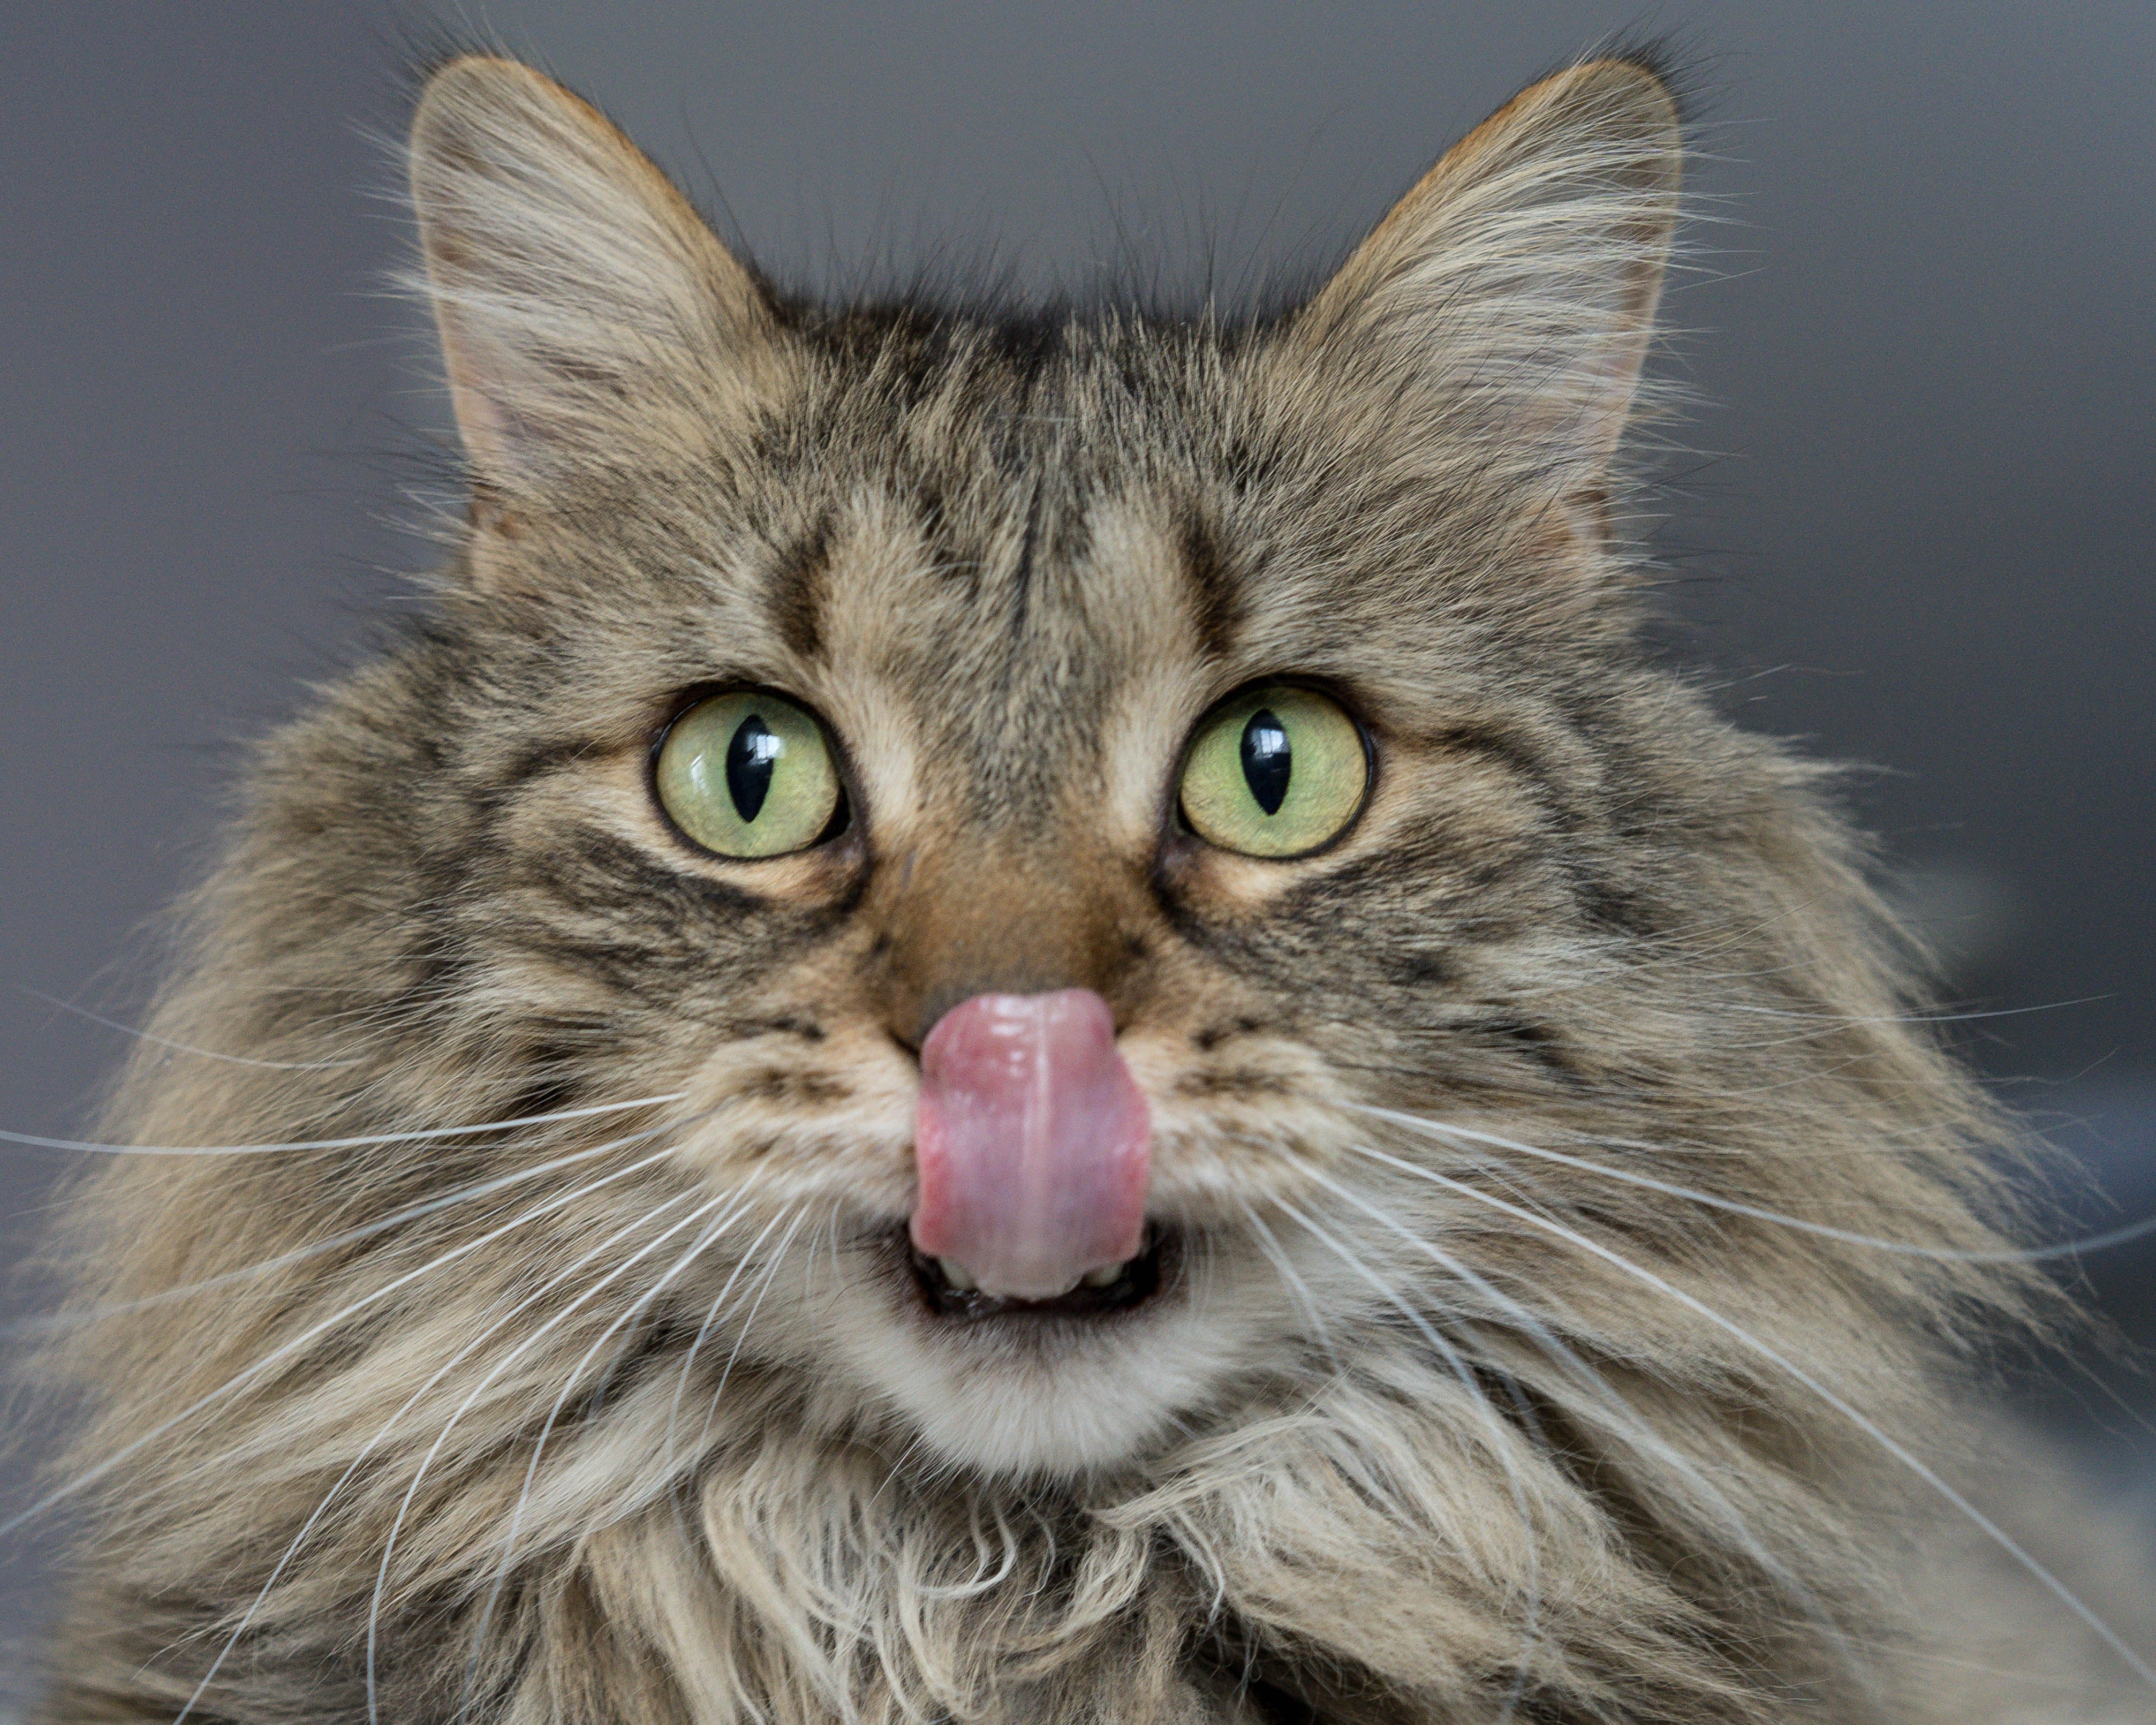 Long-haired cat licking its lips